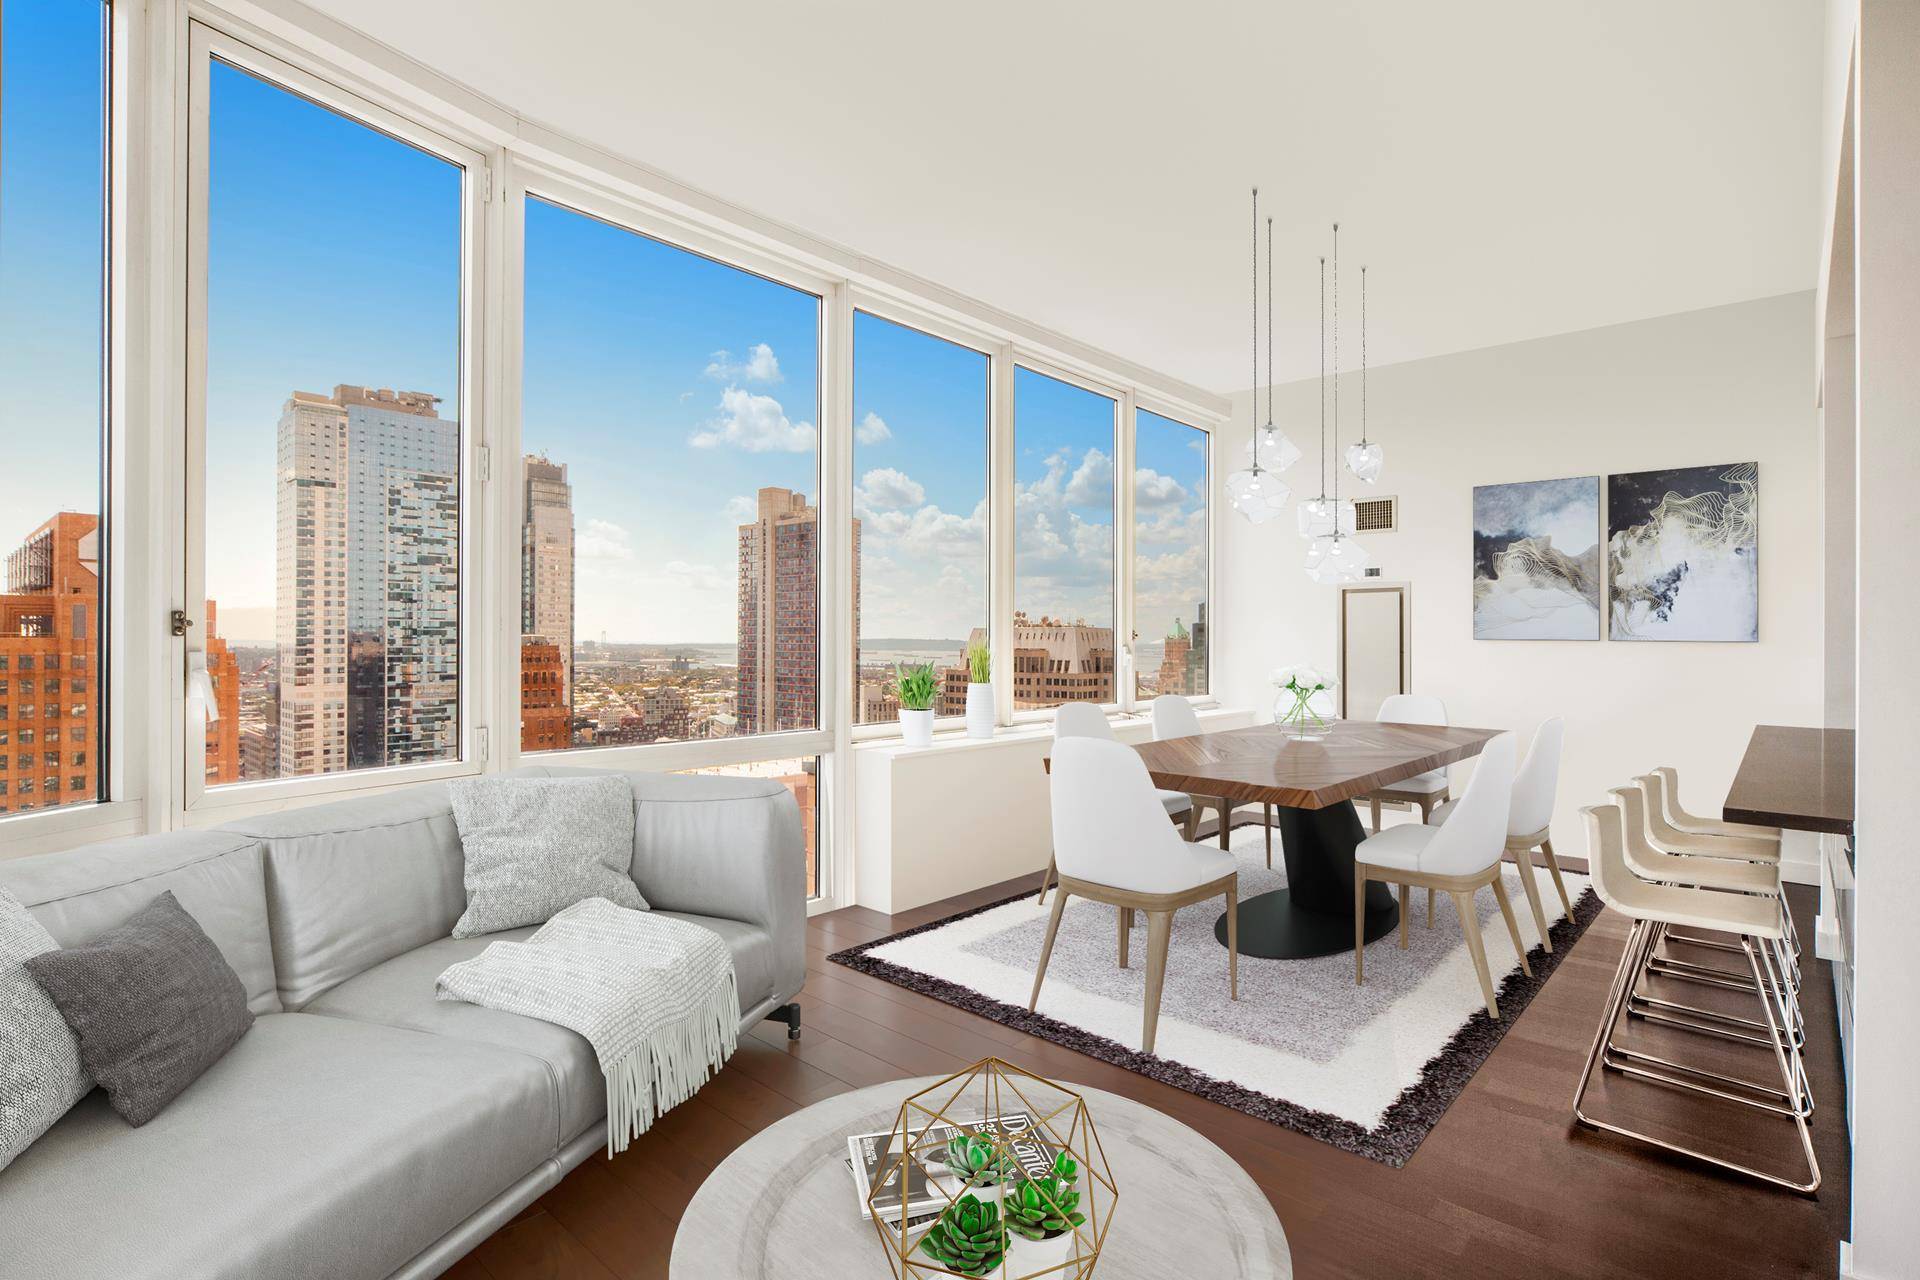 STORAGE UNIT INCLUDED ! Welcome home to your 39th floor massive, corner two bedroom two bathroom modern oasis at the highly sought after Oro condominium.